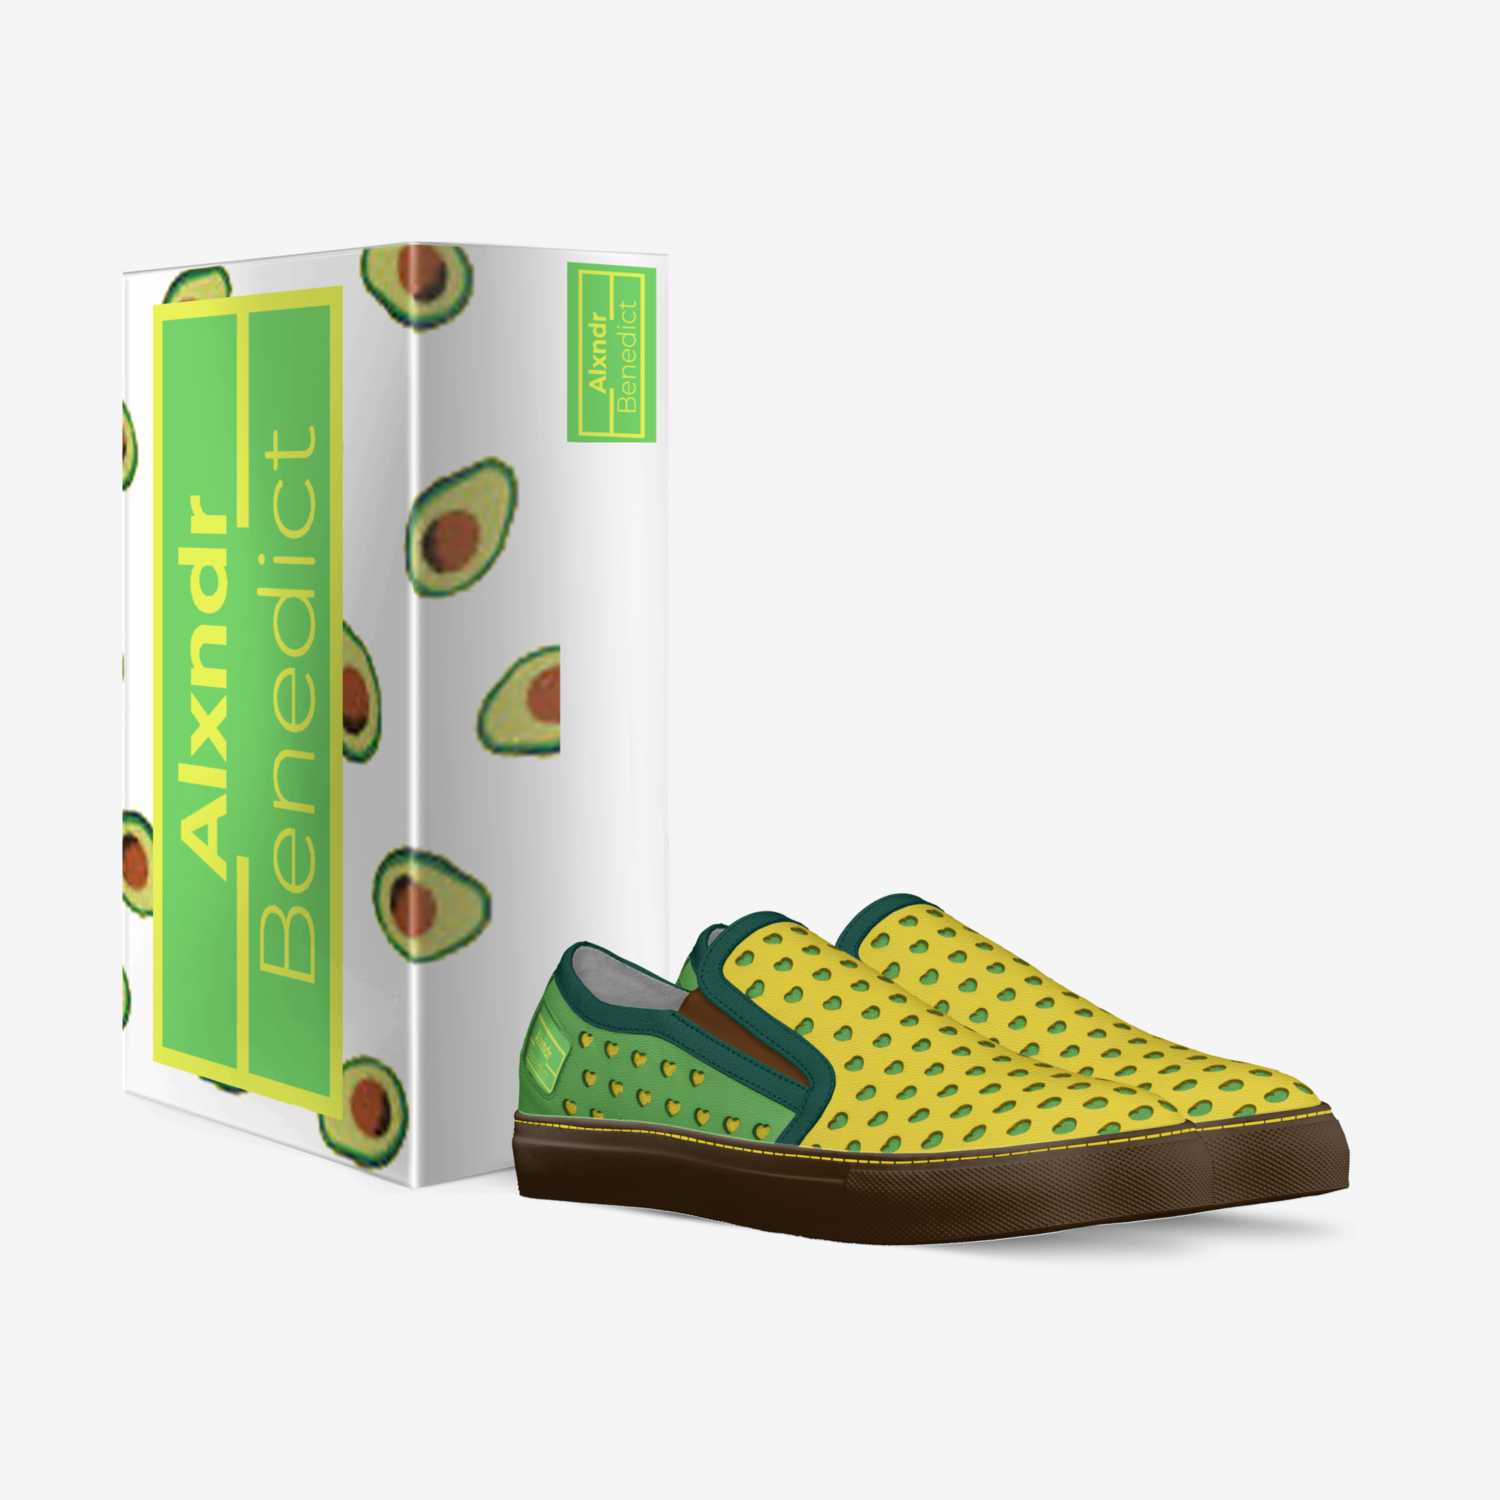 AVOCADO custom made in Italy shoes by Alexander Peters | Box view